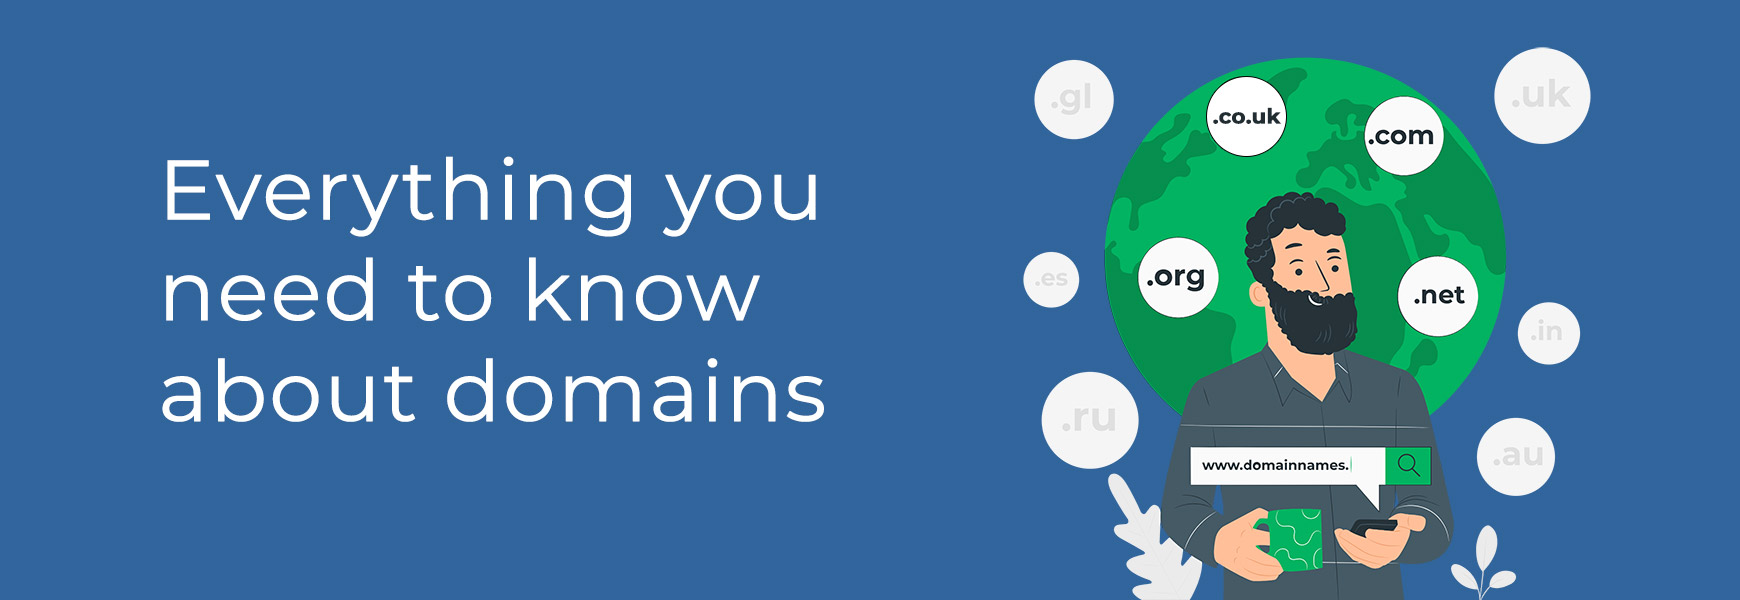 Everything you need to know about domains